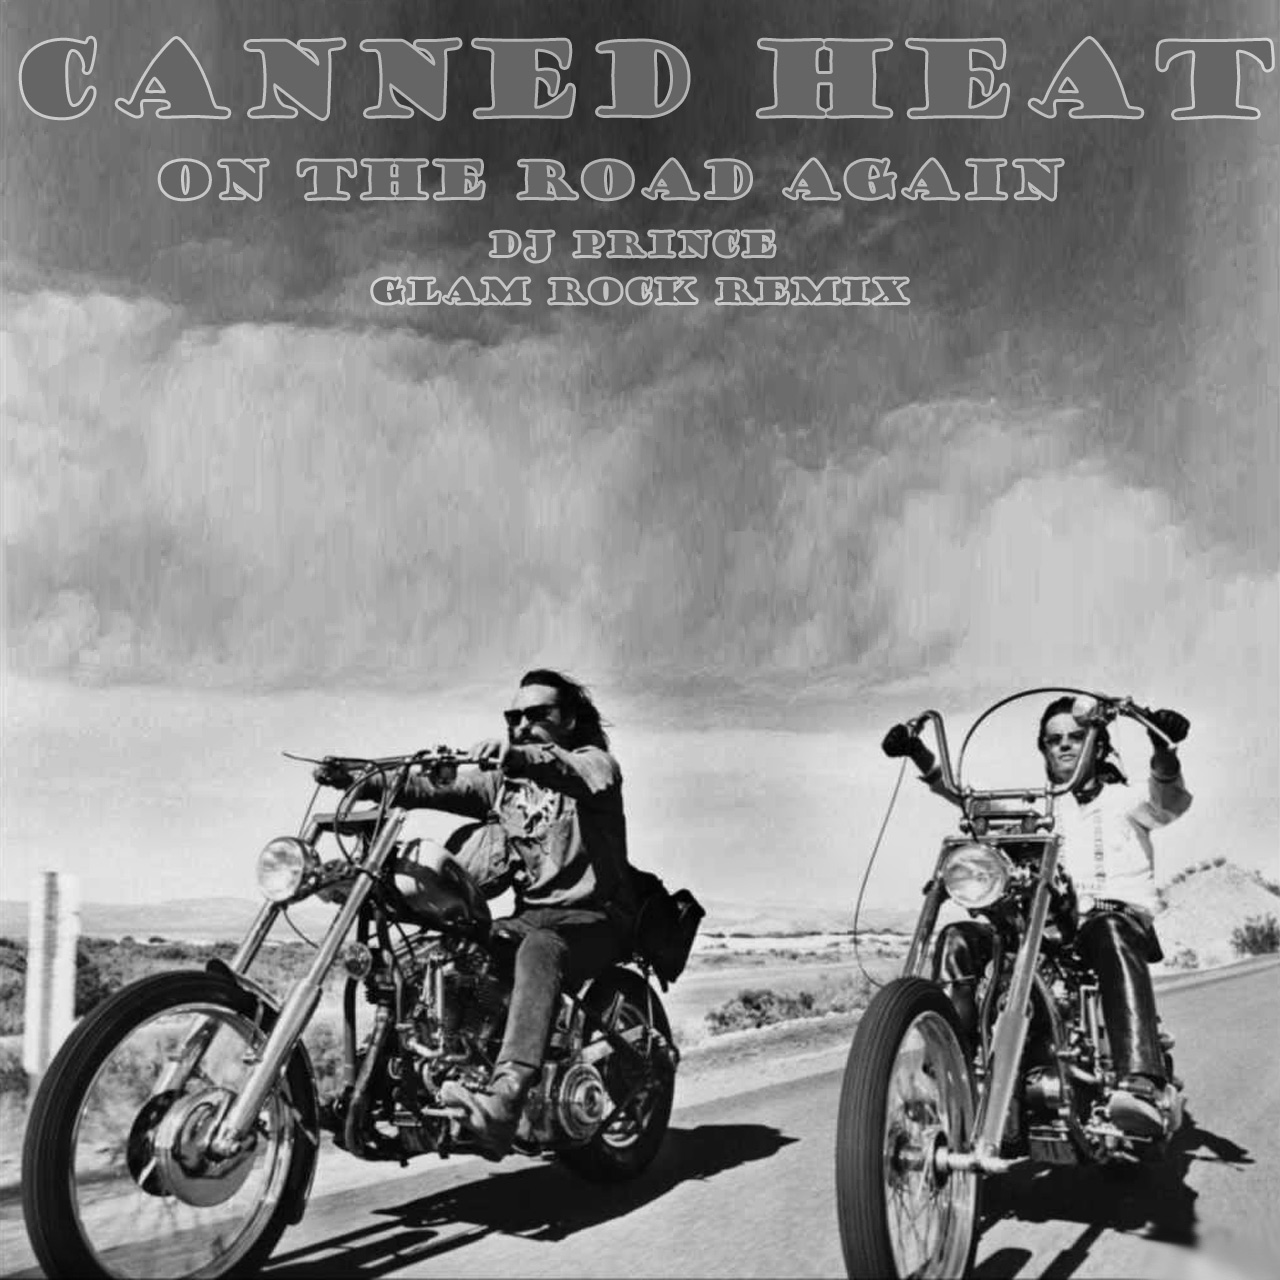 Canned Heat - On the road again (DJ Prince Glam rock remix)